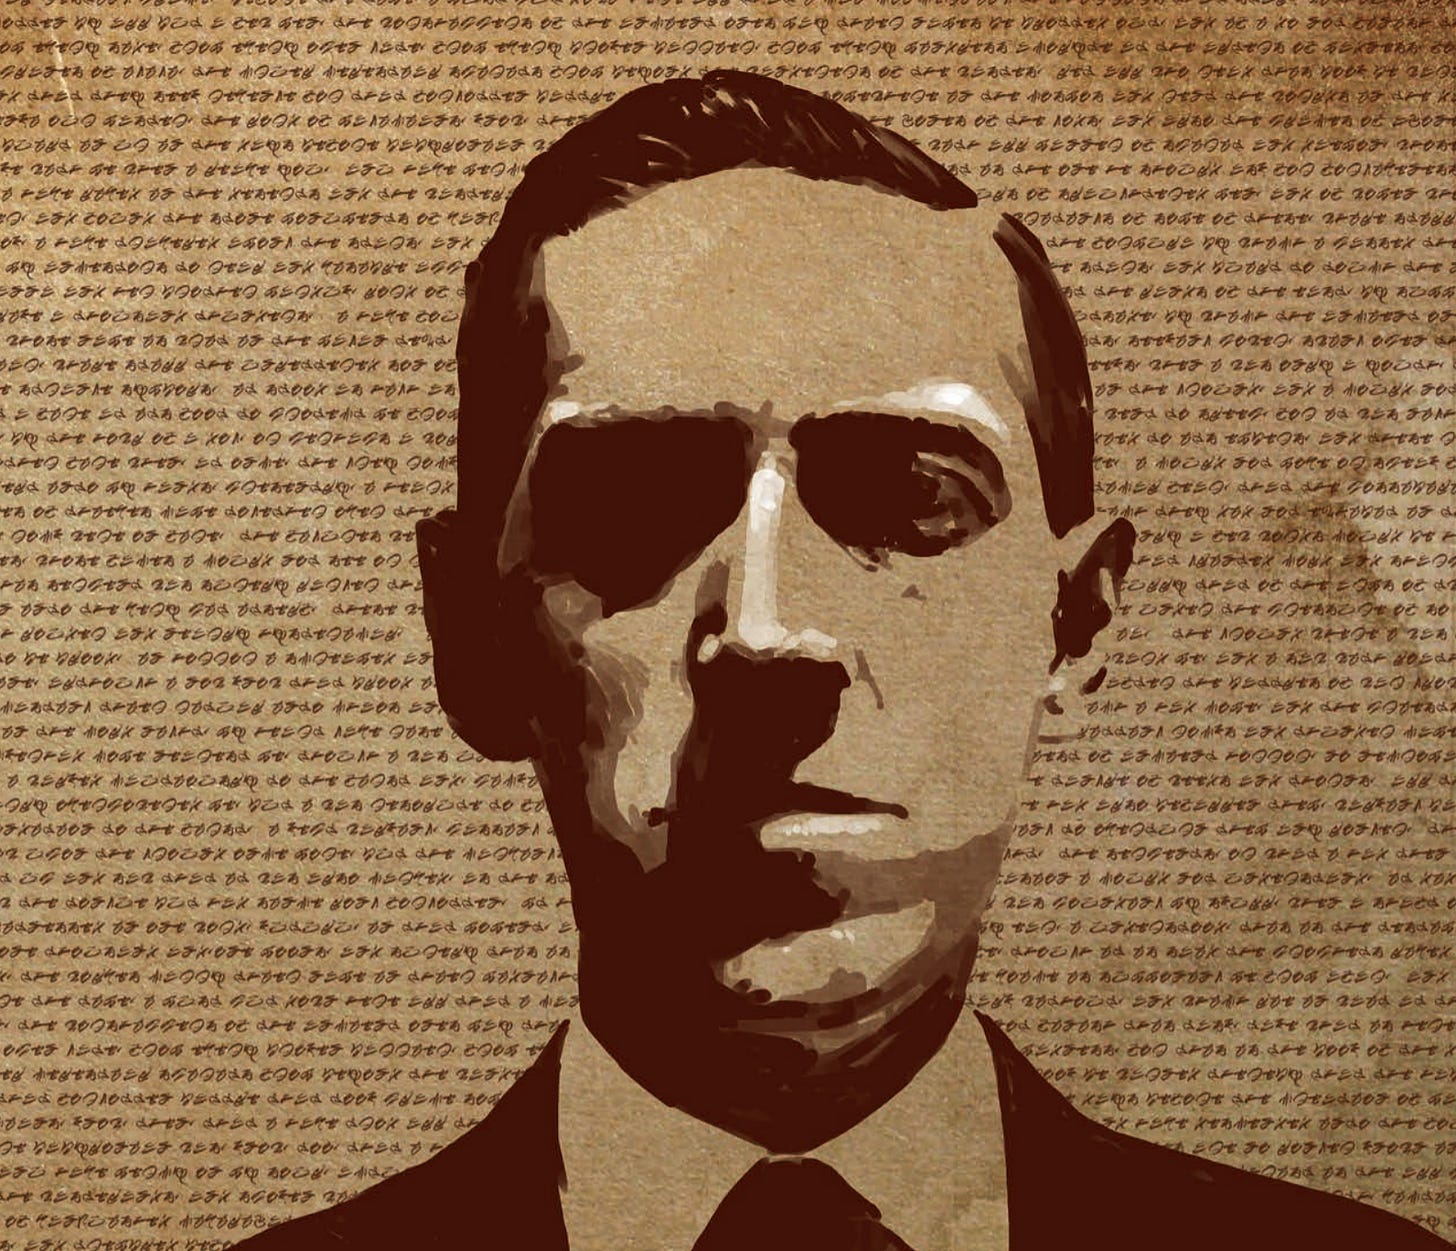 Howard Phillips Lovecraft, as seen in the 7th edition rules for Call of Cthulhu